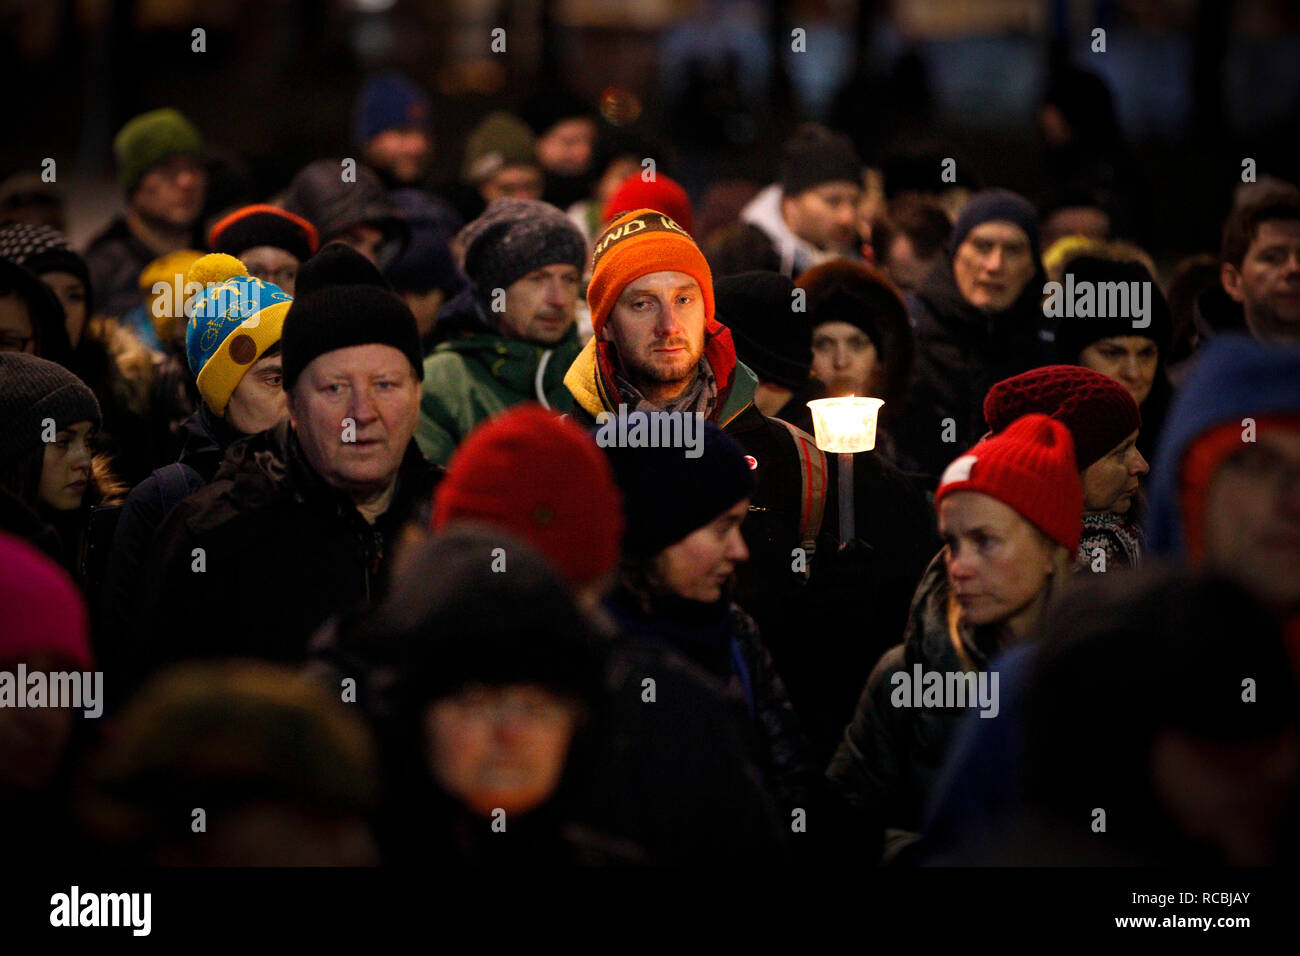 (190115) -- WARSAW, Jan. 15, 2019 (Xinhua) -- People march in commemoration of Pawel Adamowicz, the late Mayor of the Polish port city of Gdansk, in center of Warsaw, Poland, Jan. 14, 2018.     The UN refugee agency, UNHCR, said Monday it is 'deeply shocked and saddened' to hear that Pawel Adamowicz has died after being stabbed at a charity event.     Adamowicz launched the Gdansk 'Immigrant Integration Model' in 2016, a model that has inspired other Polish cities, said the UN agency.     The agency wrote in February 2018 that the Gdansk Model is a comprehensive program to help refugees and mi Stock Photo